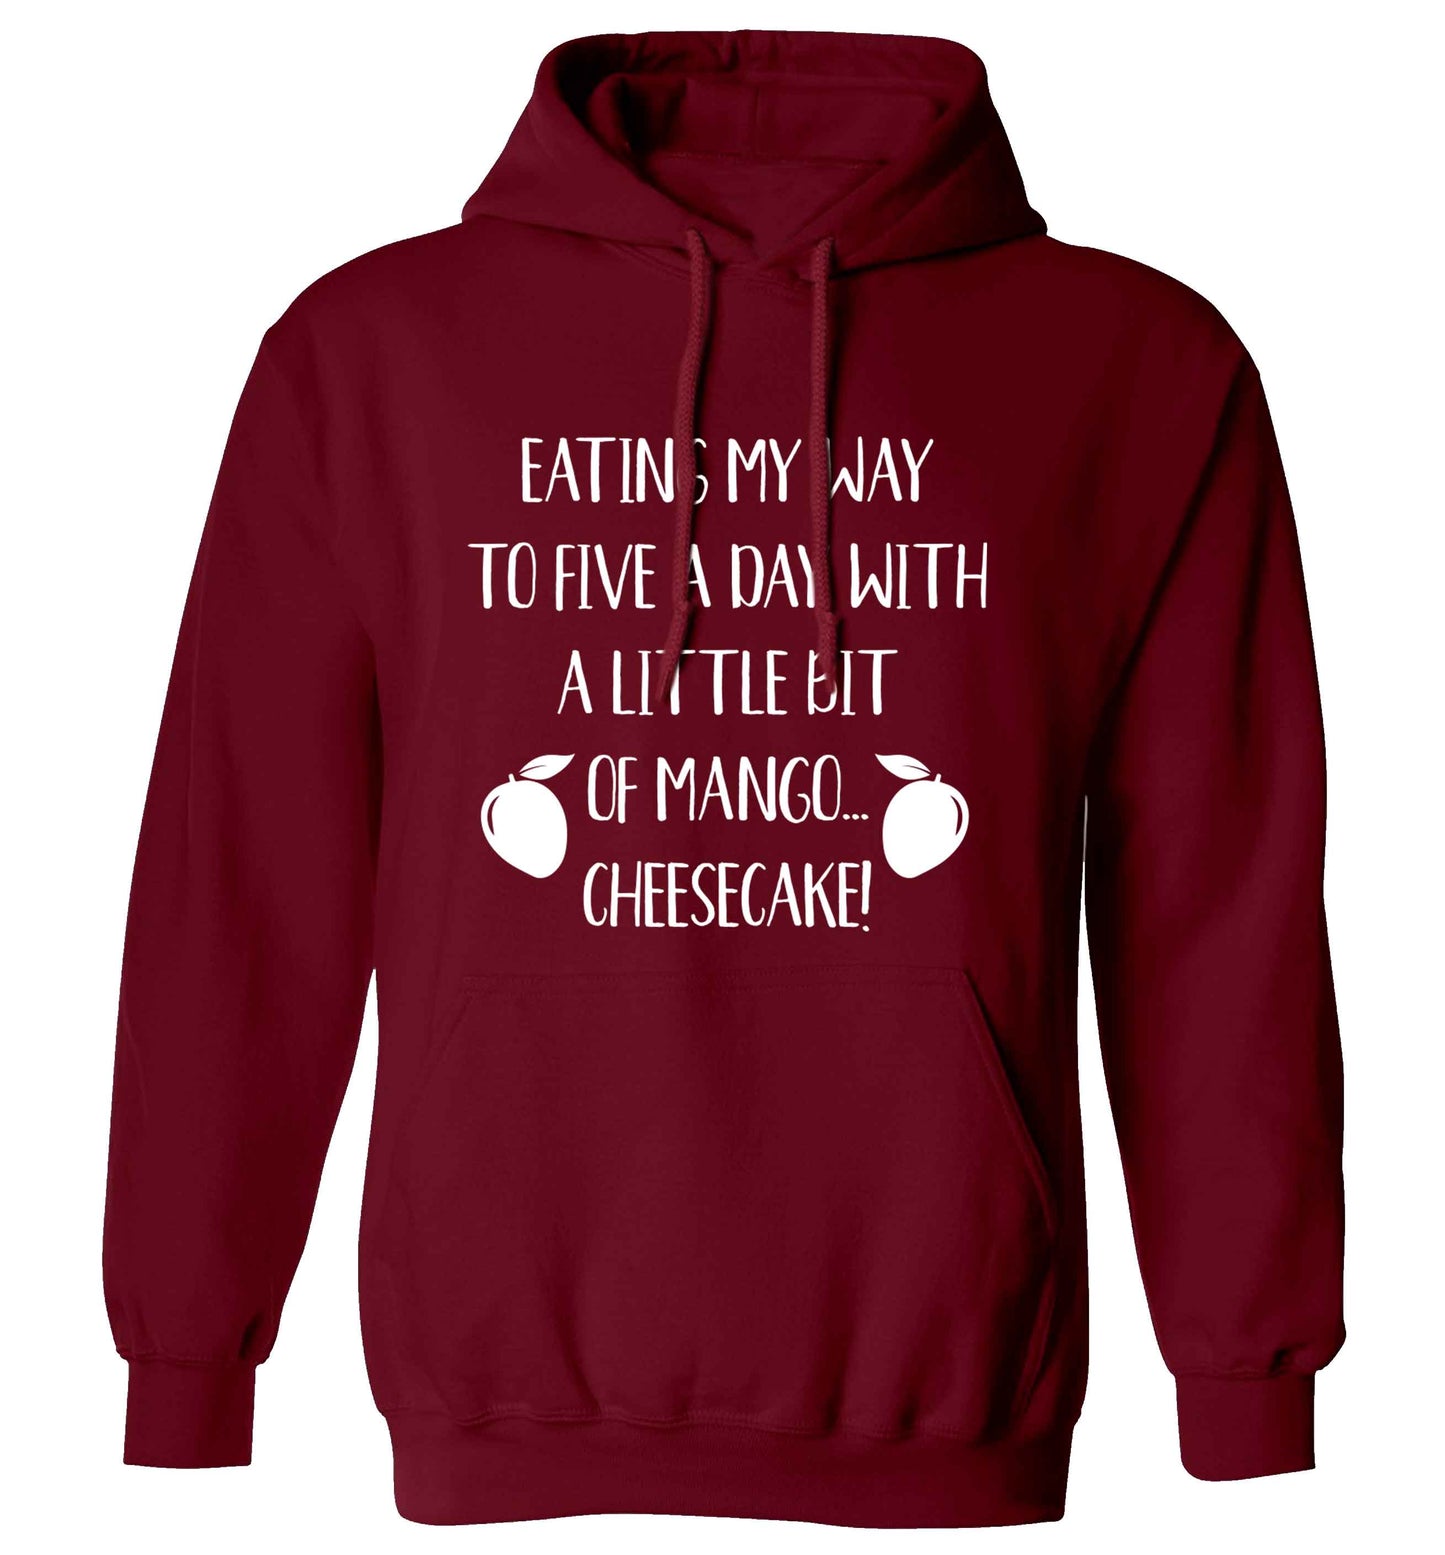 Eating my way to five a day with a little bit of mango cheesecake adults unisex maroon hoodie 2XL